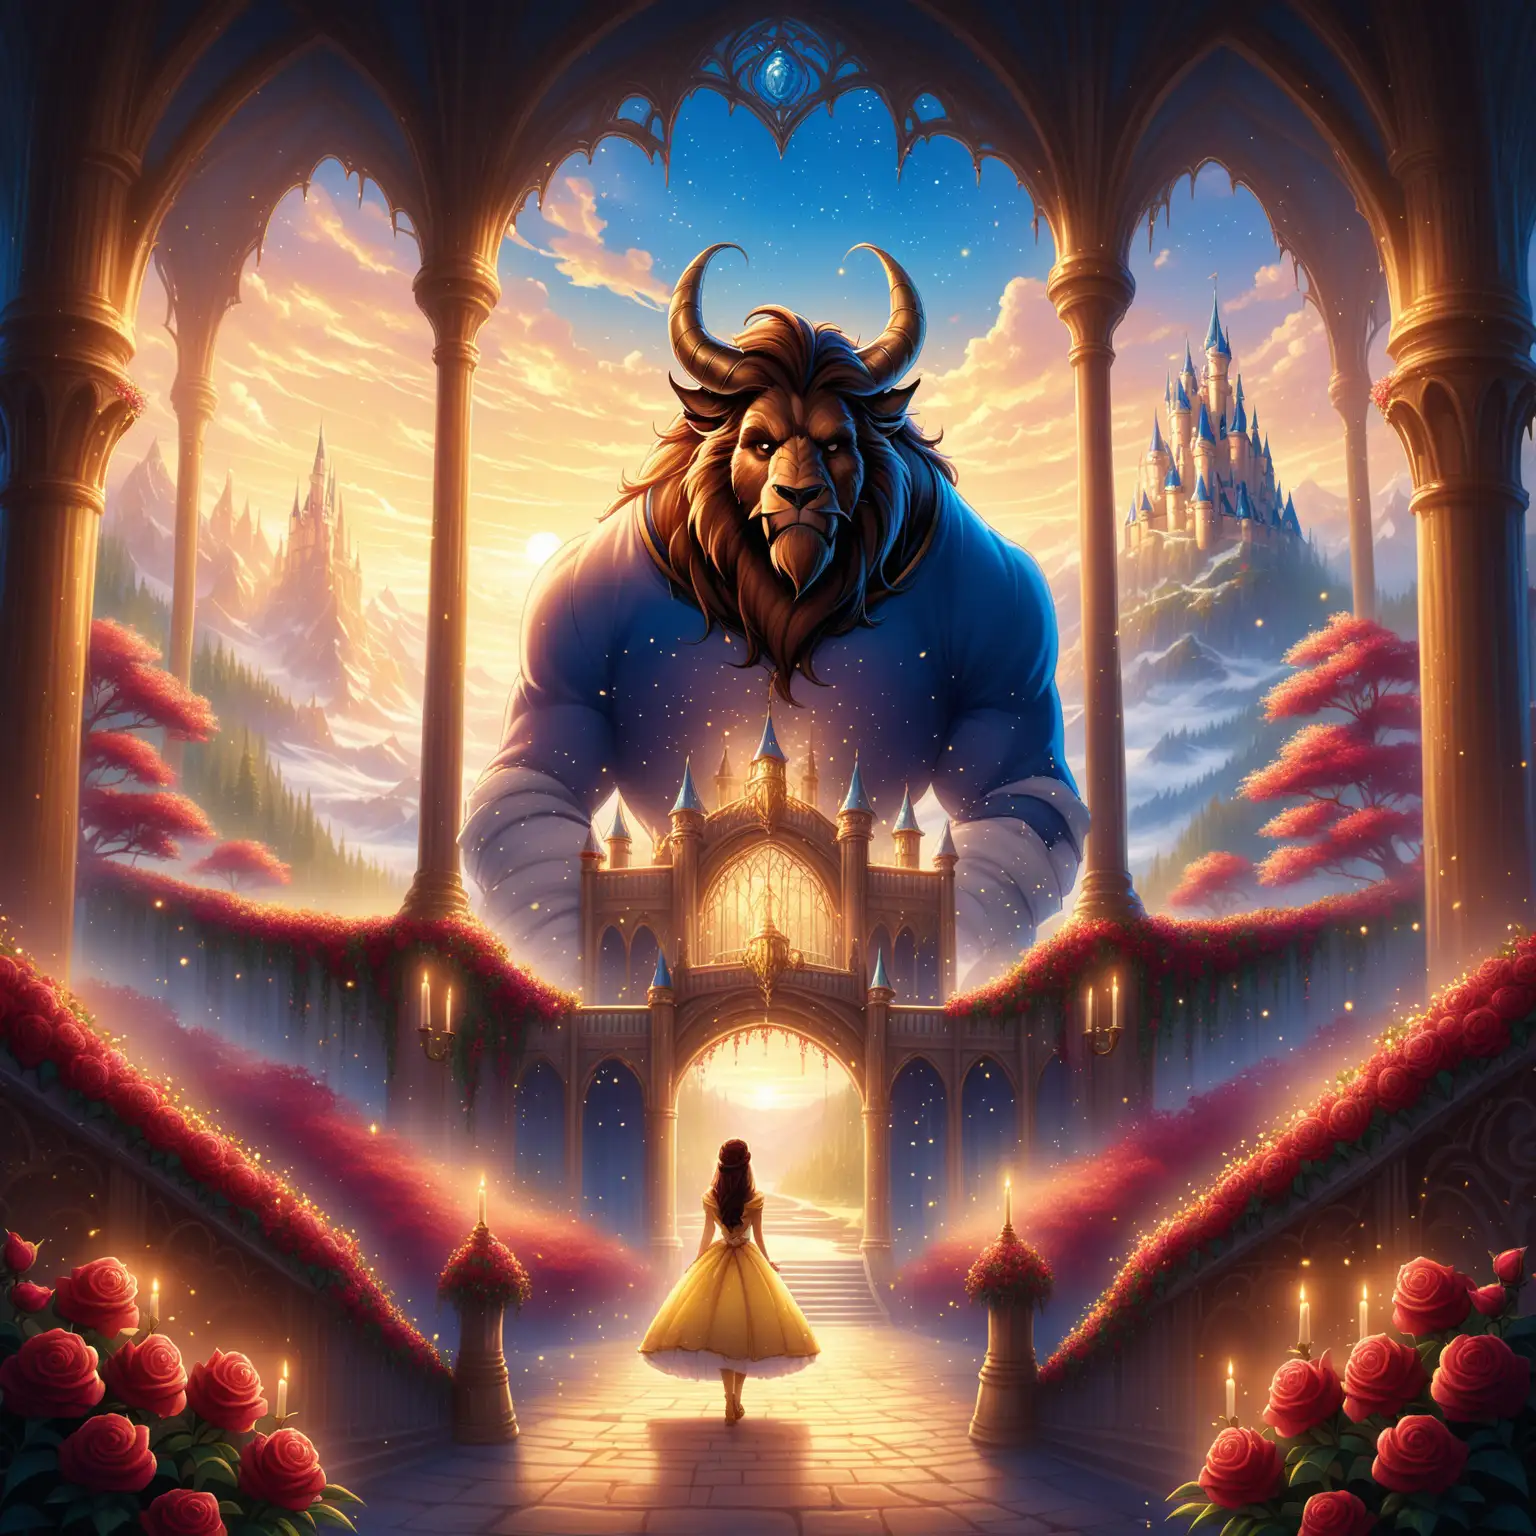 Enchanting Tale Beauty and the Beast in a Stunning Fantasy Setting